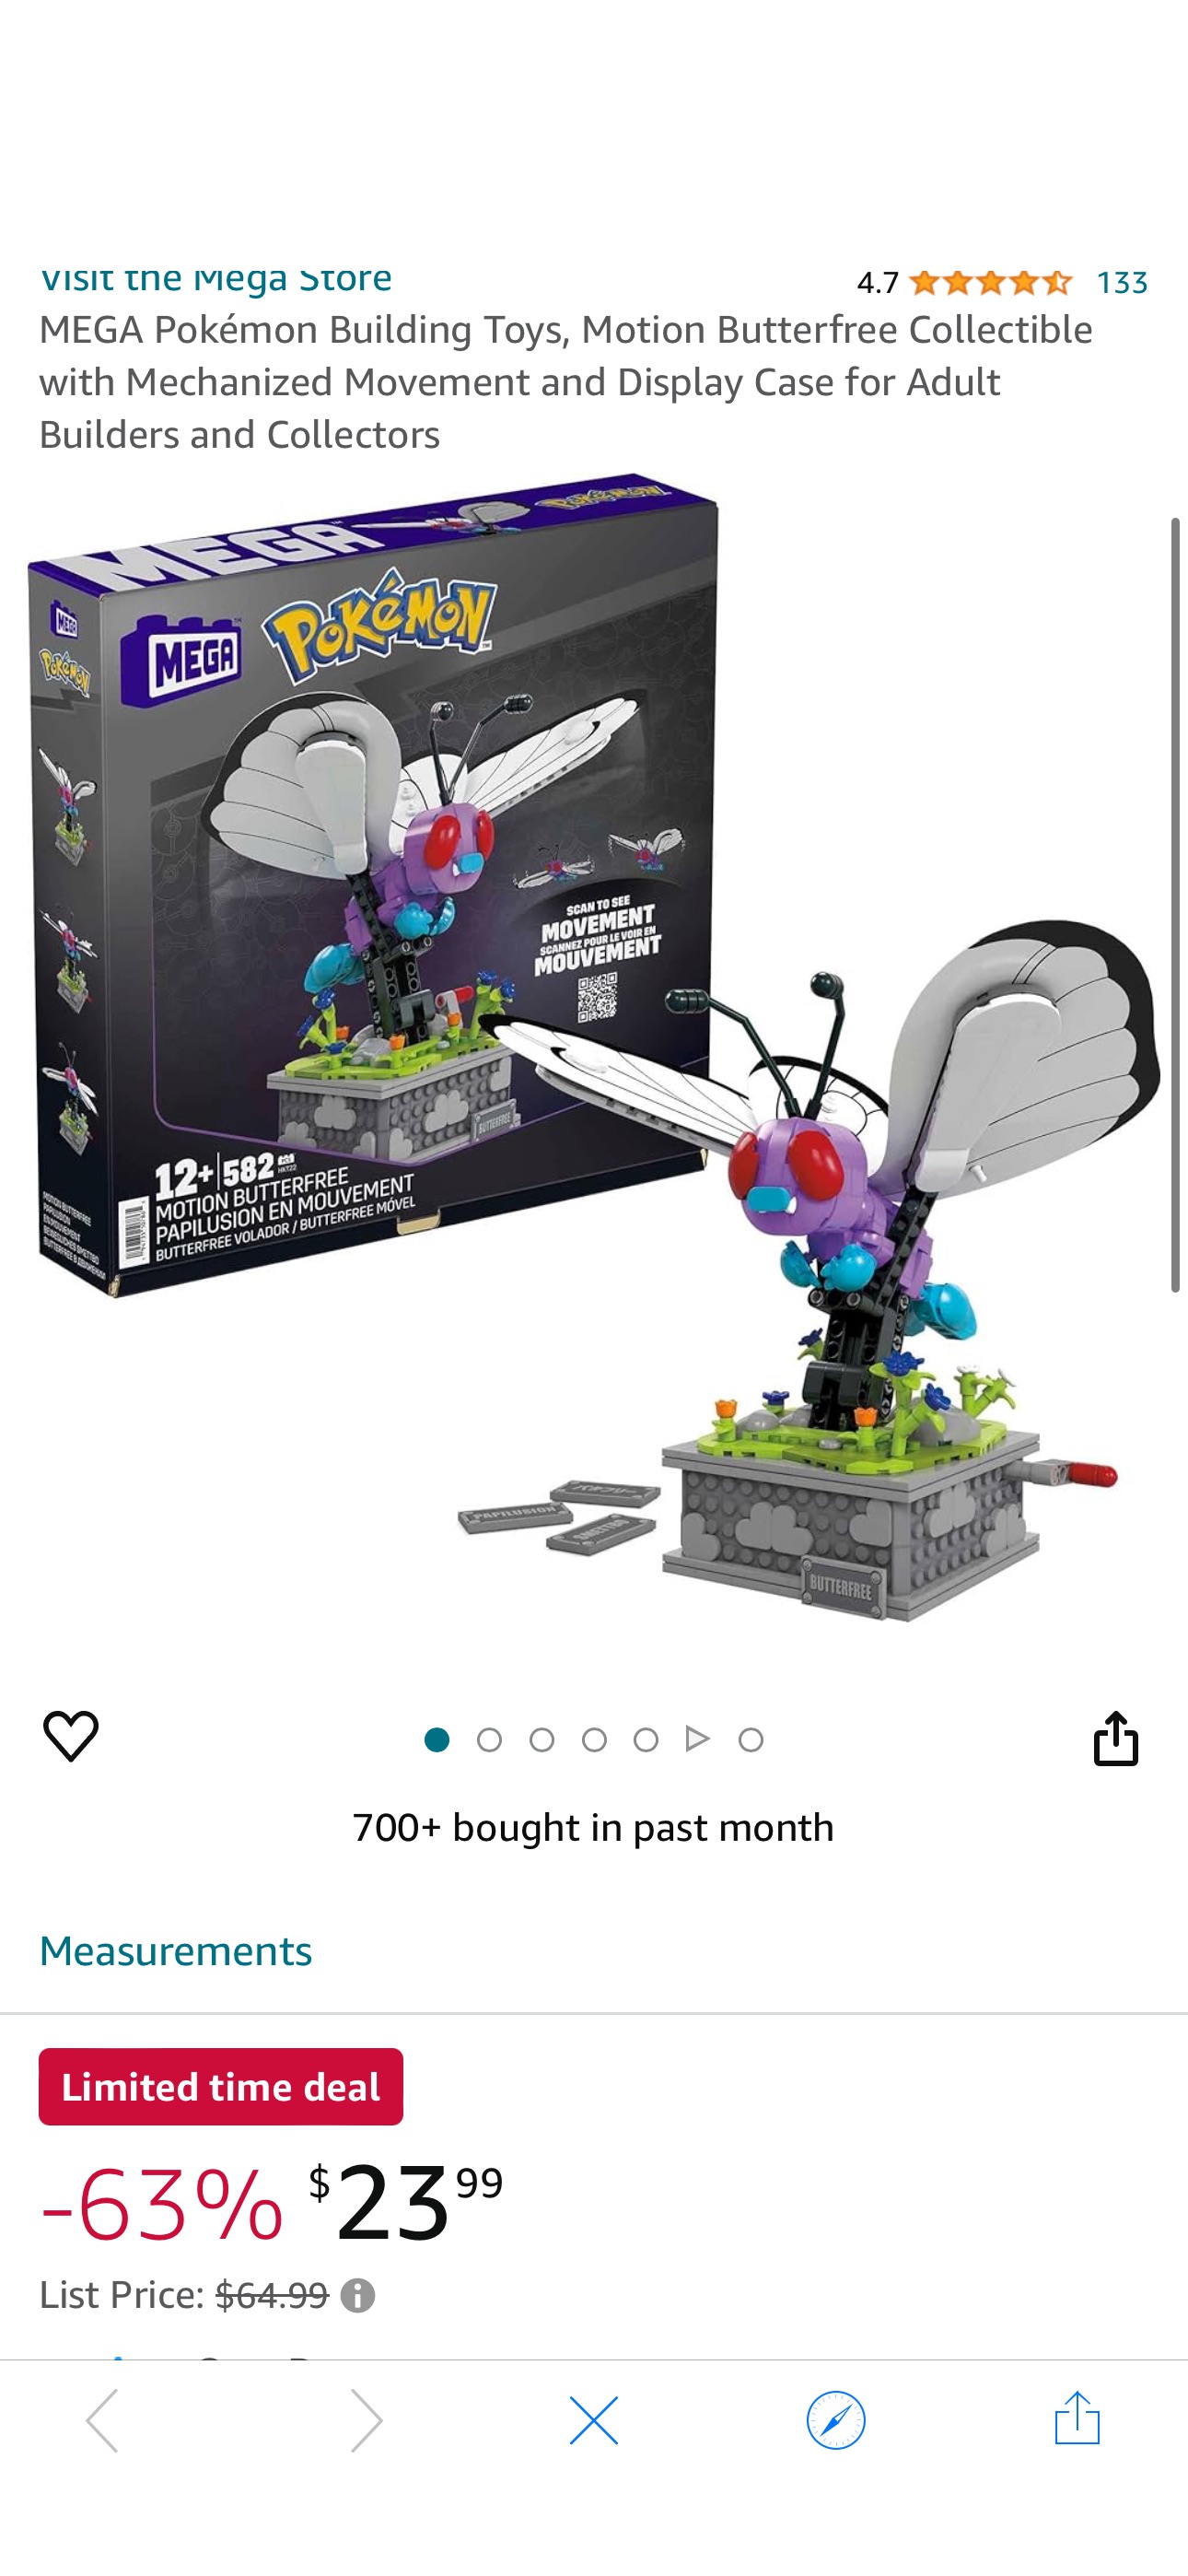 Amazon.com: ​MEGA Pokémon Building Toys, Motion Butterfree Collectible with Mechanized Movement and Display Case for Adult Builders and Collectors : Toys & Games